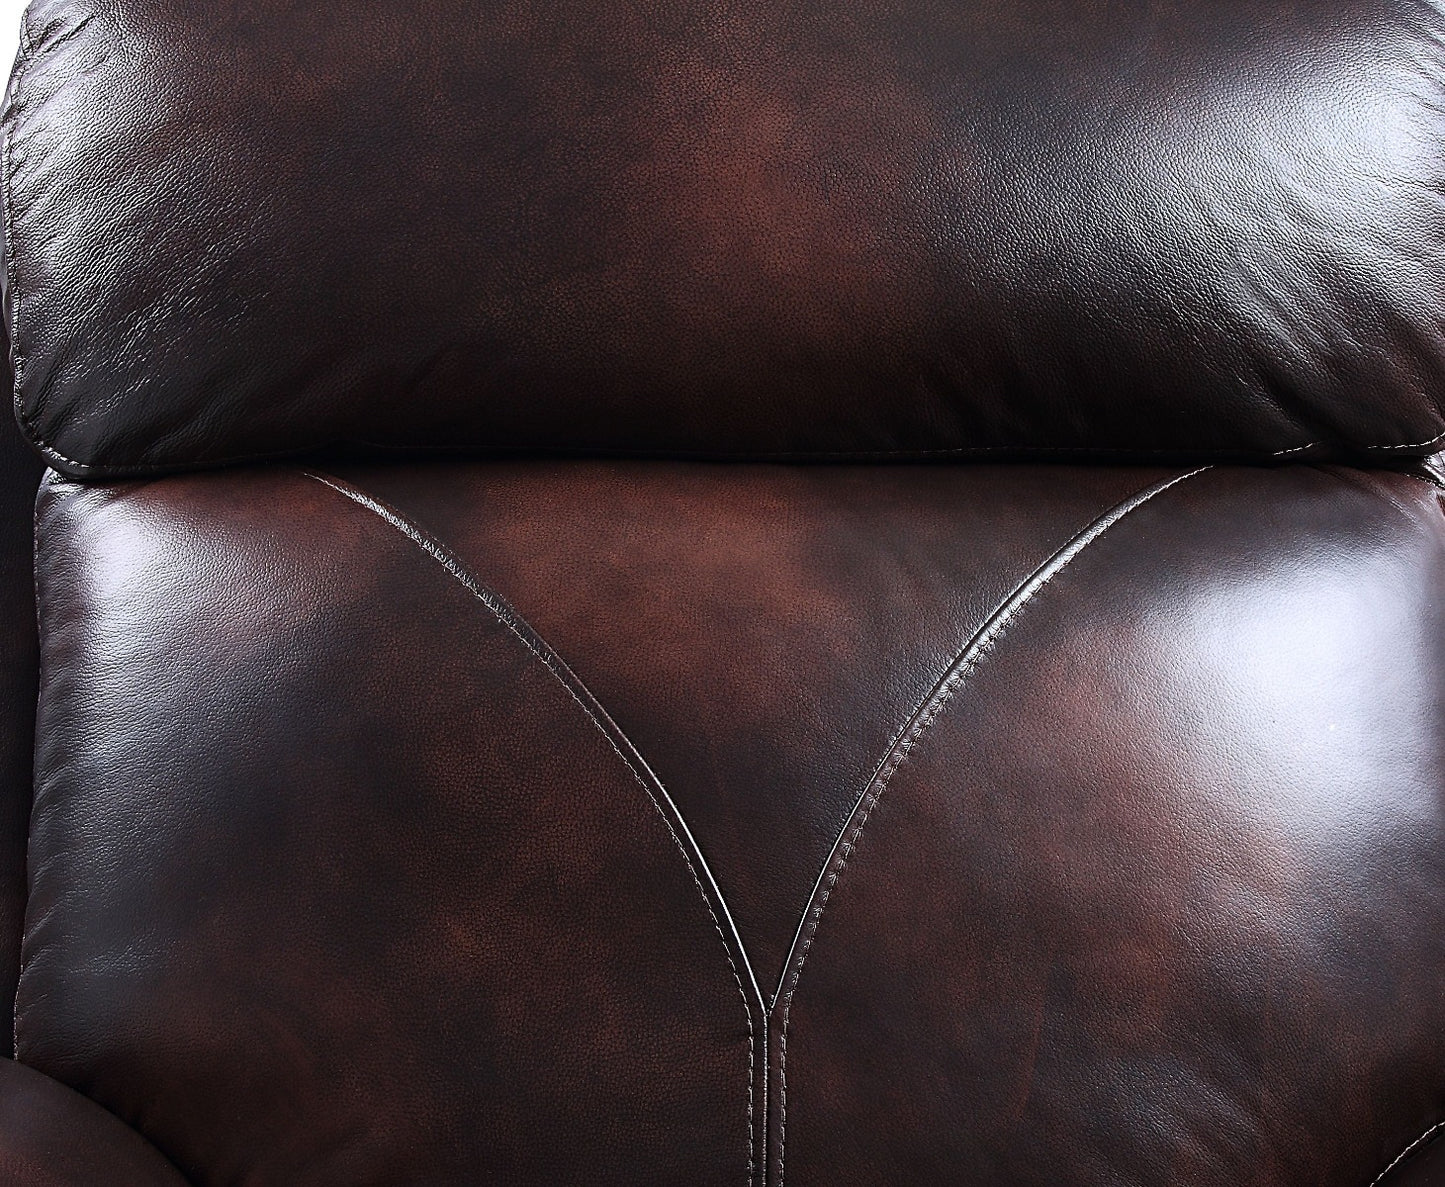 Perfiel Two-Tone Top Grain Leather Sofa Collection